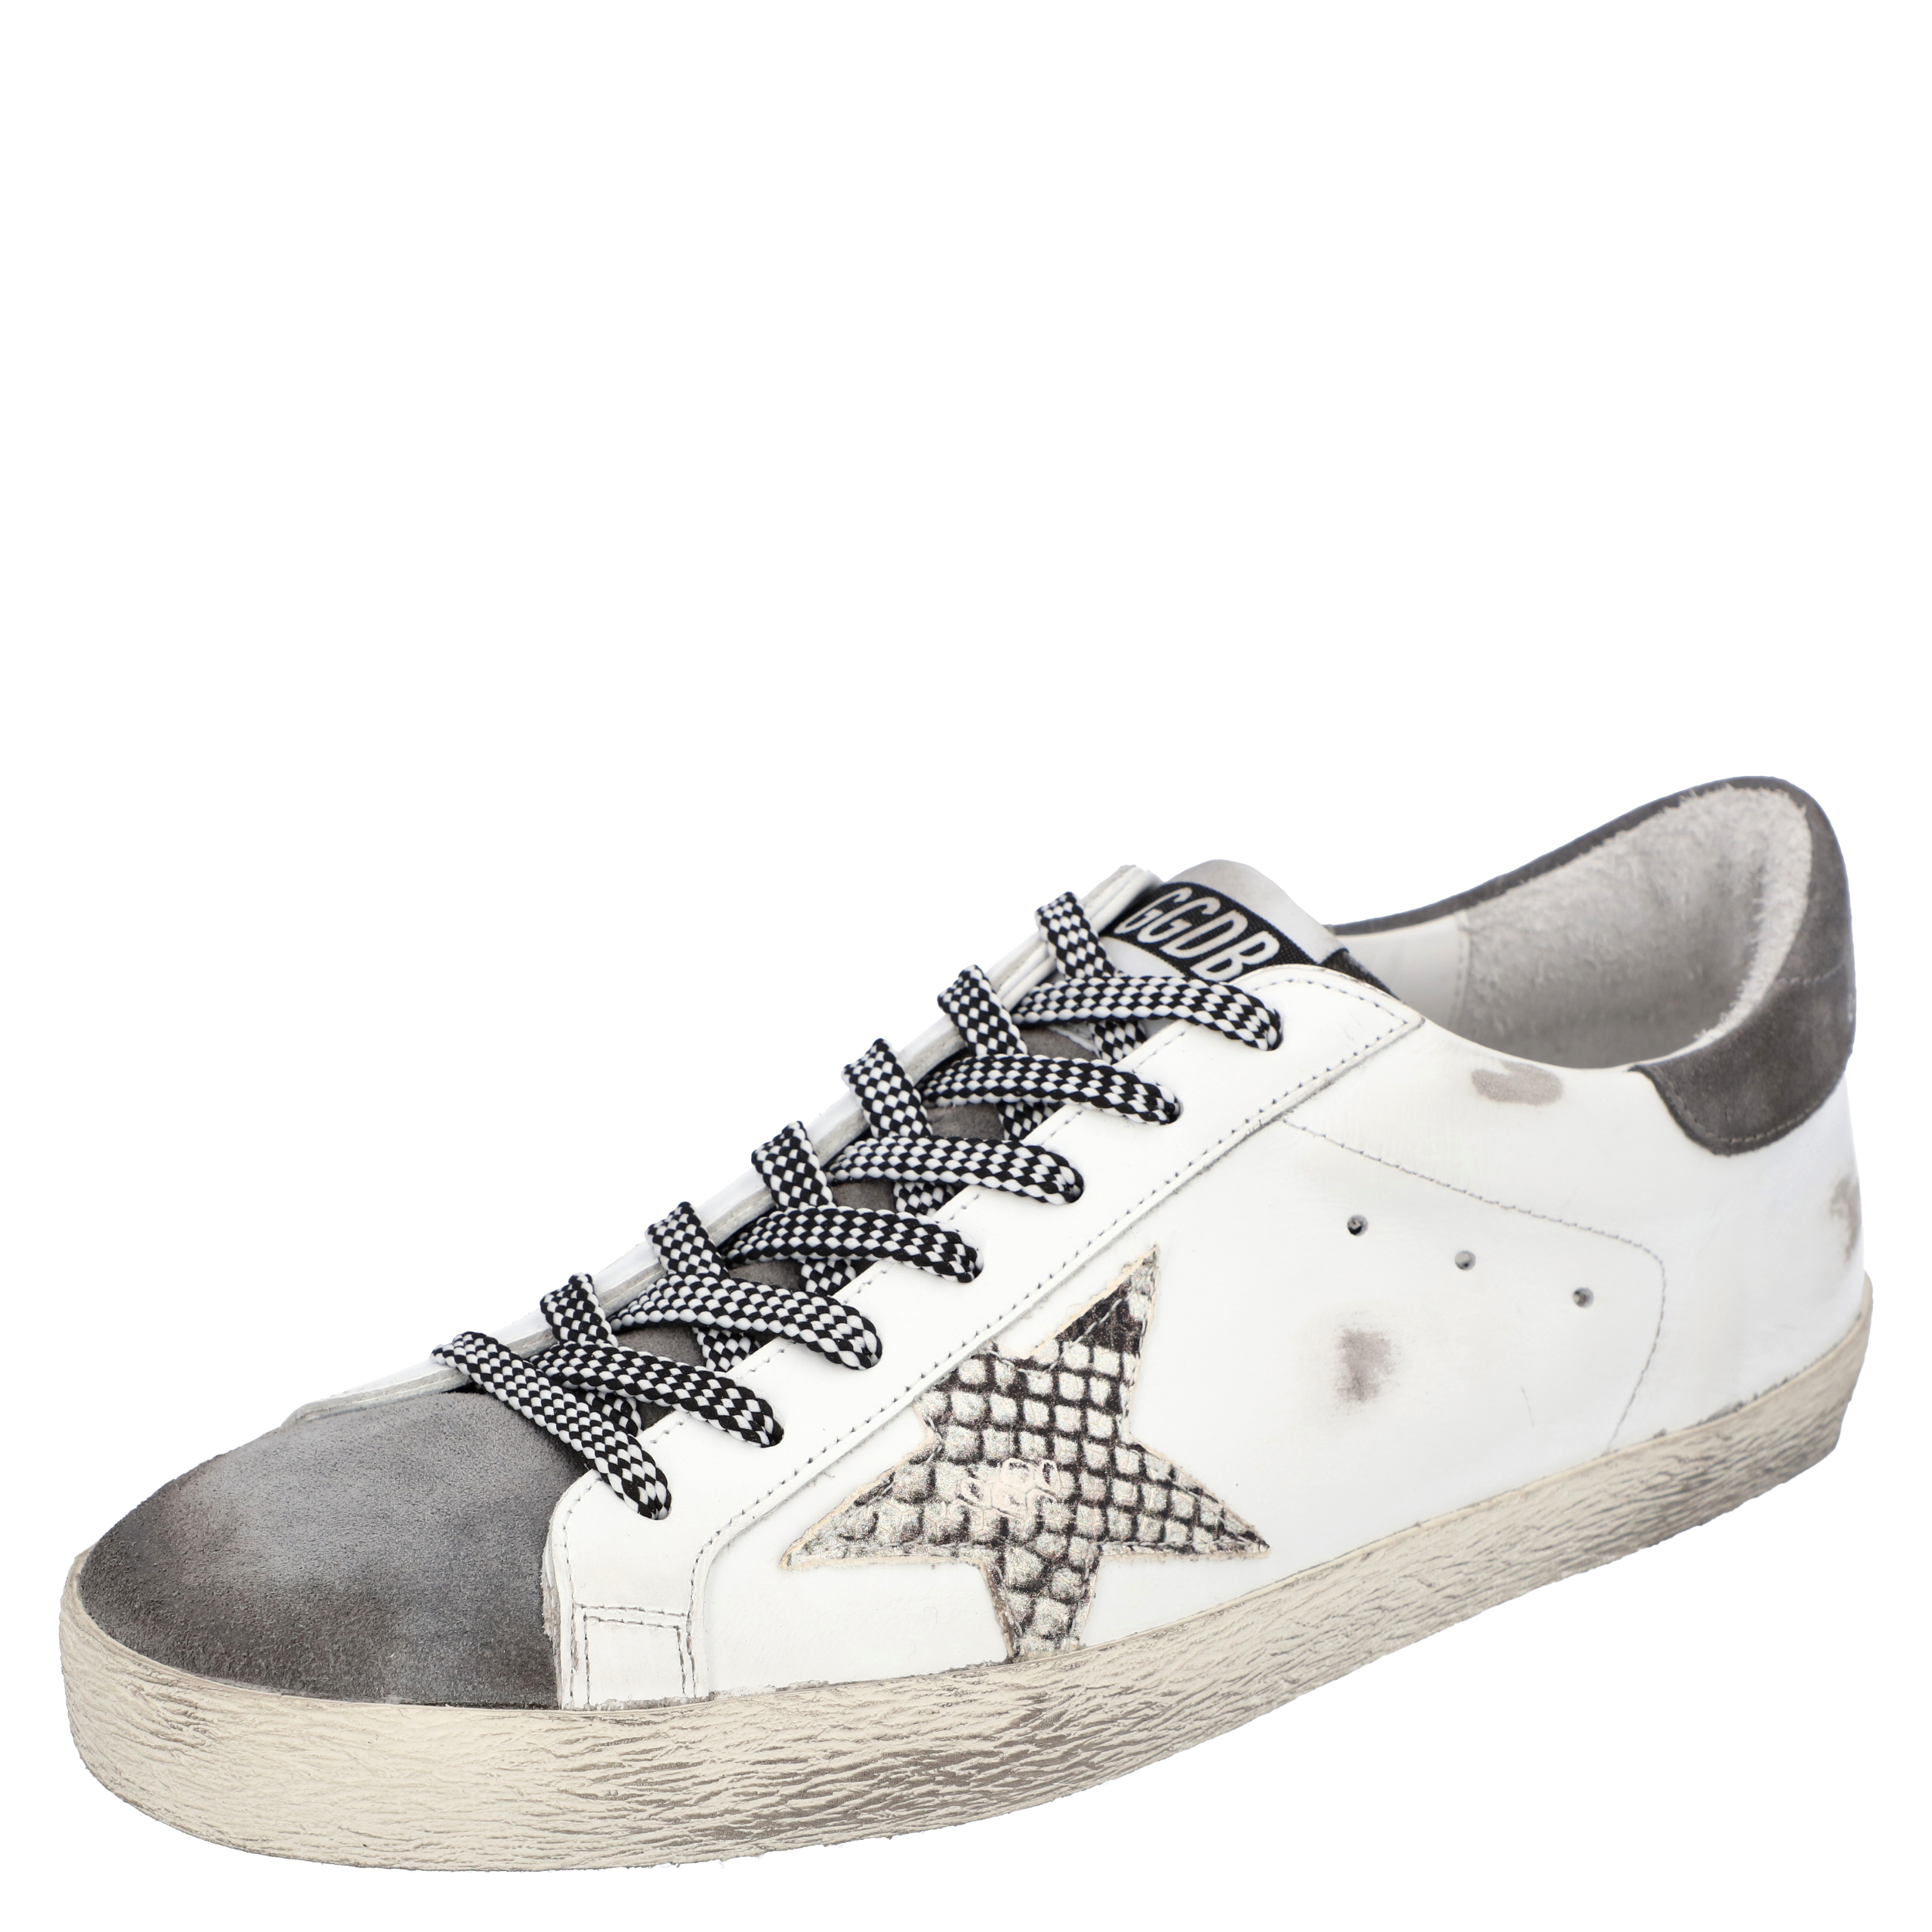 Golden Goose White/Grey Leather Superstar Sneakers Size EU 41